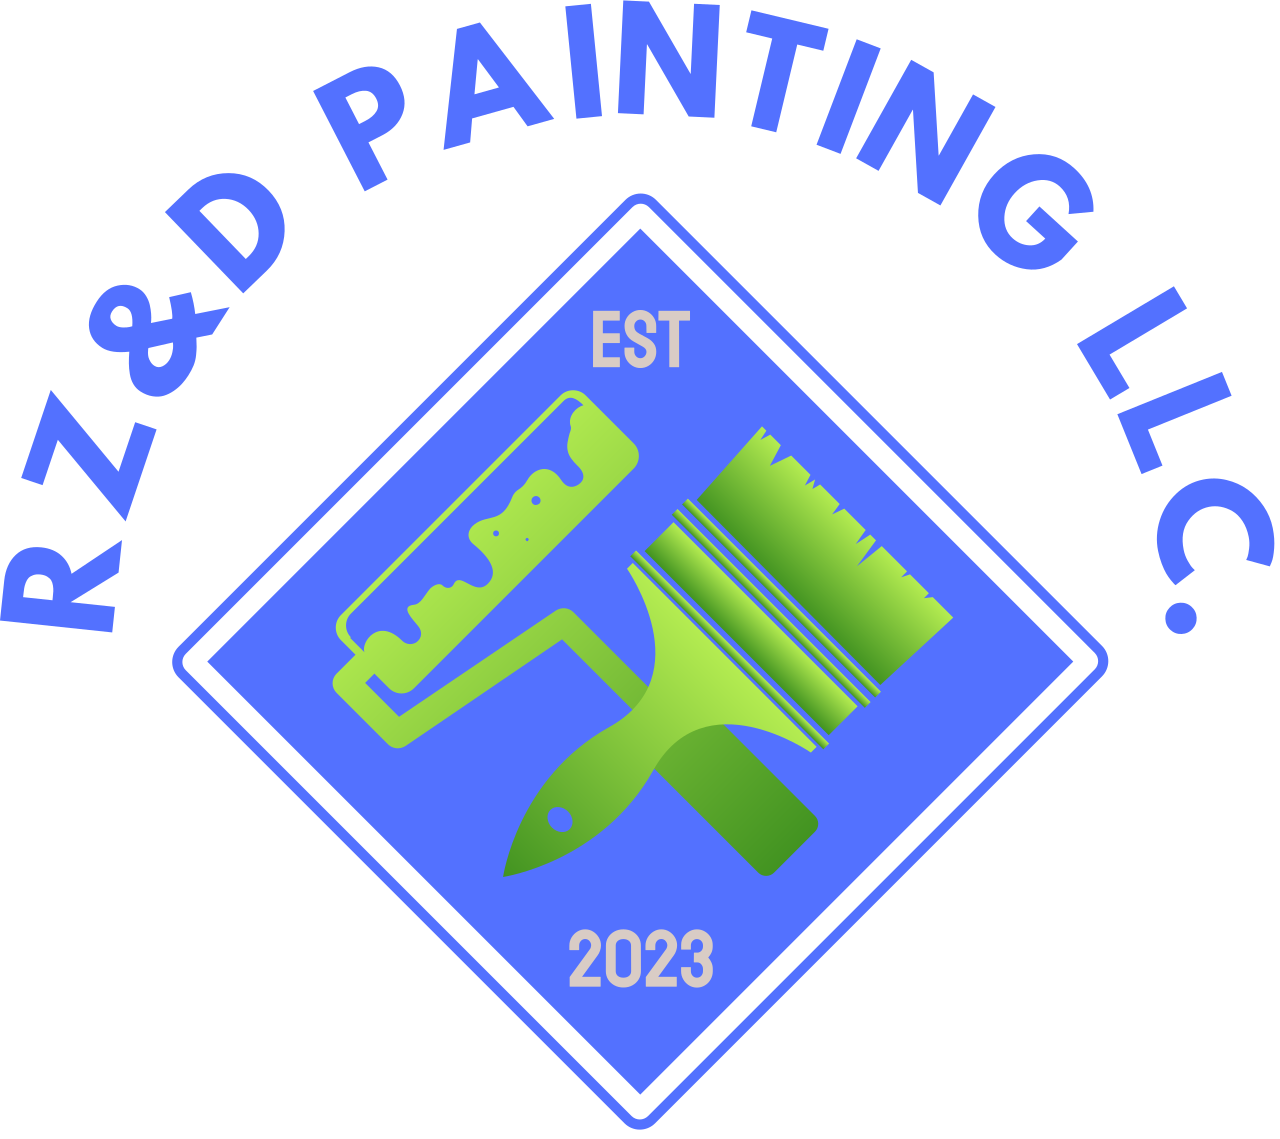 RZ&D PAINTING LLC.'s web page